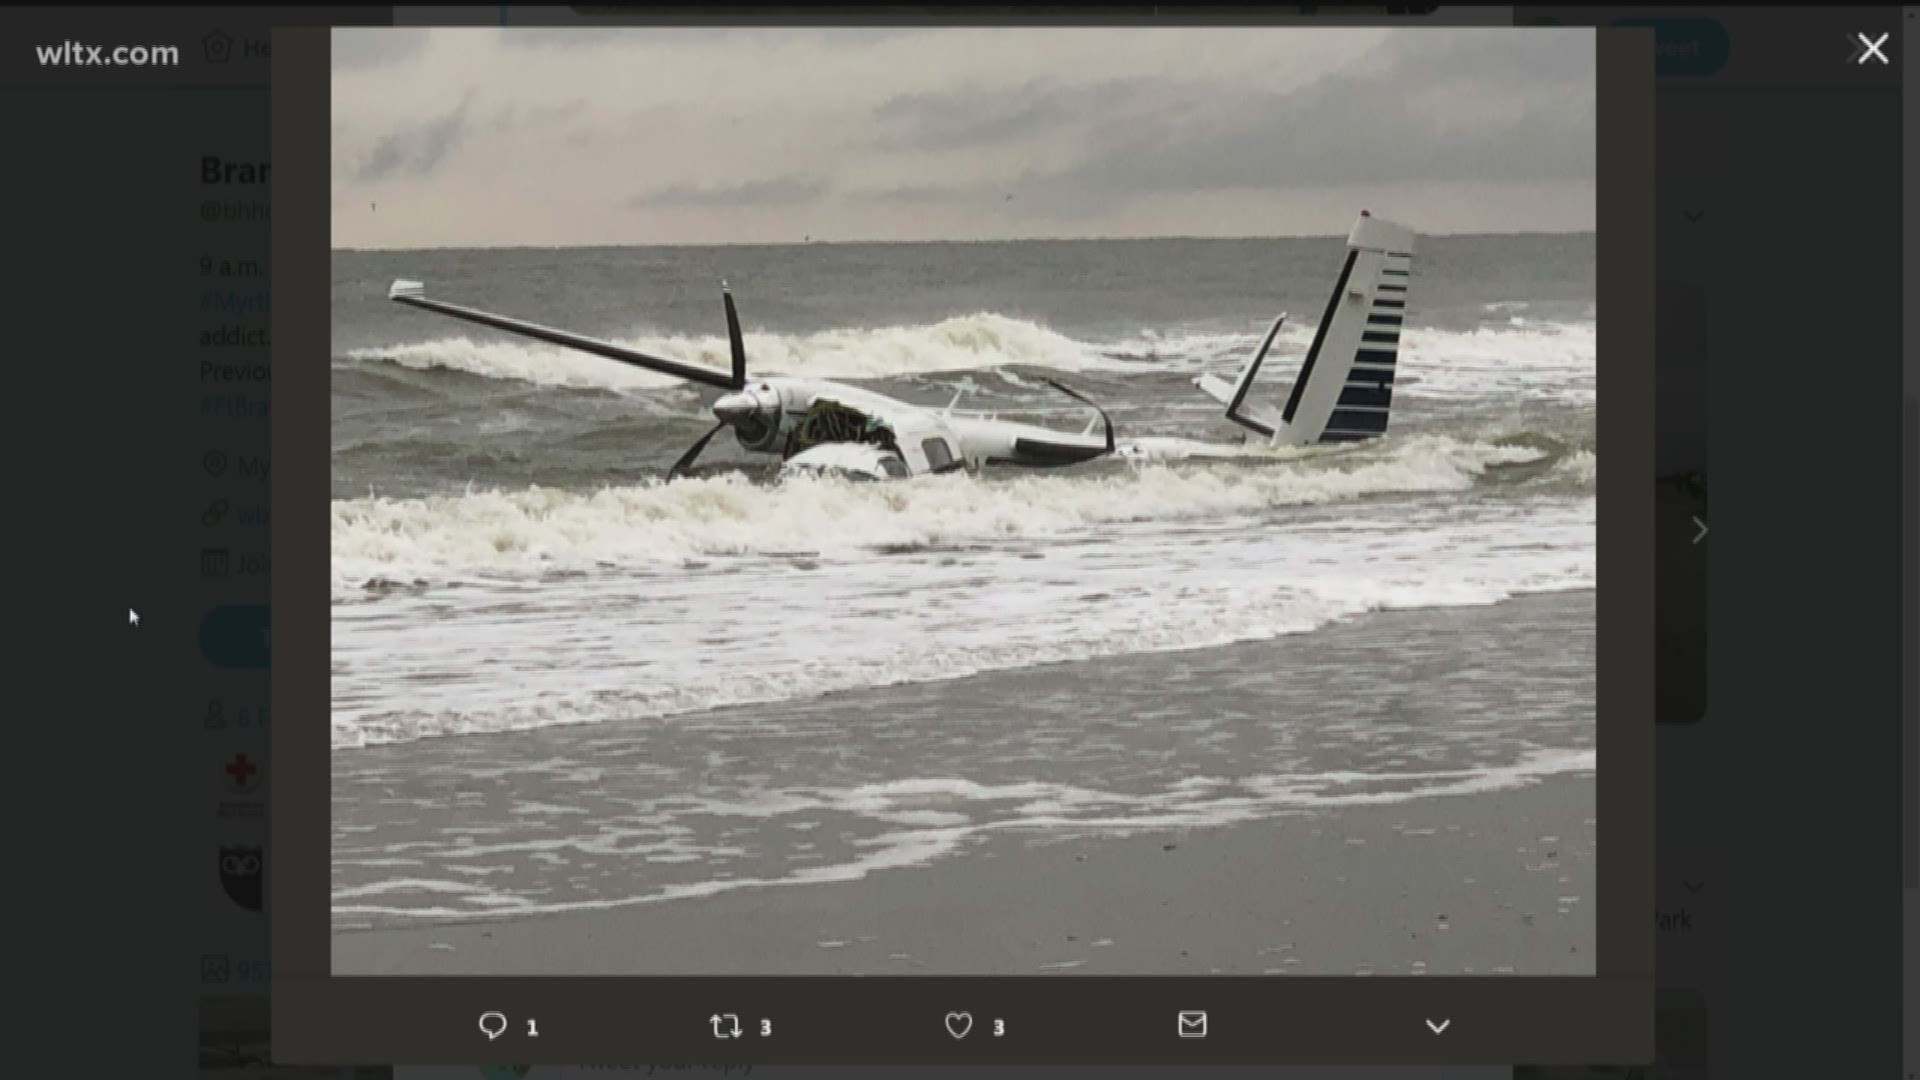 A small plane crashed into the ocean in Myrtle Beach this afternoon Officials say that a good samaritan pulled the pilot out of the plane...
	The pilot was the only person on board, and has been hospitalized in critical condition.